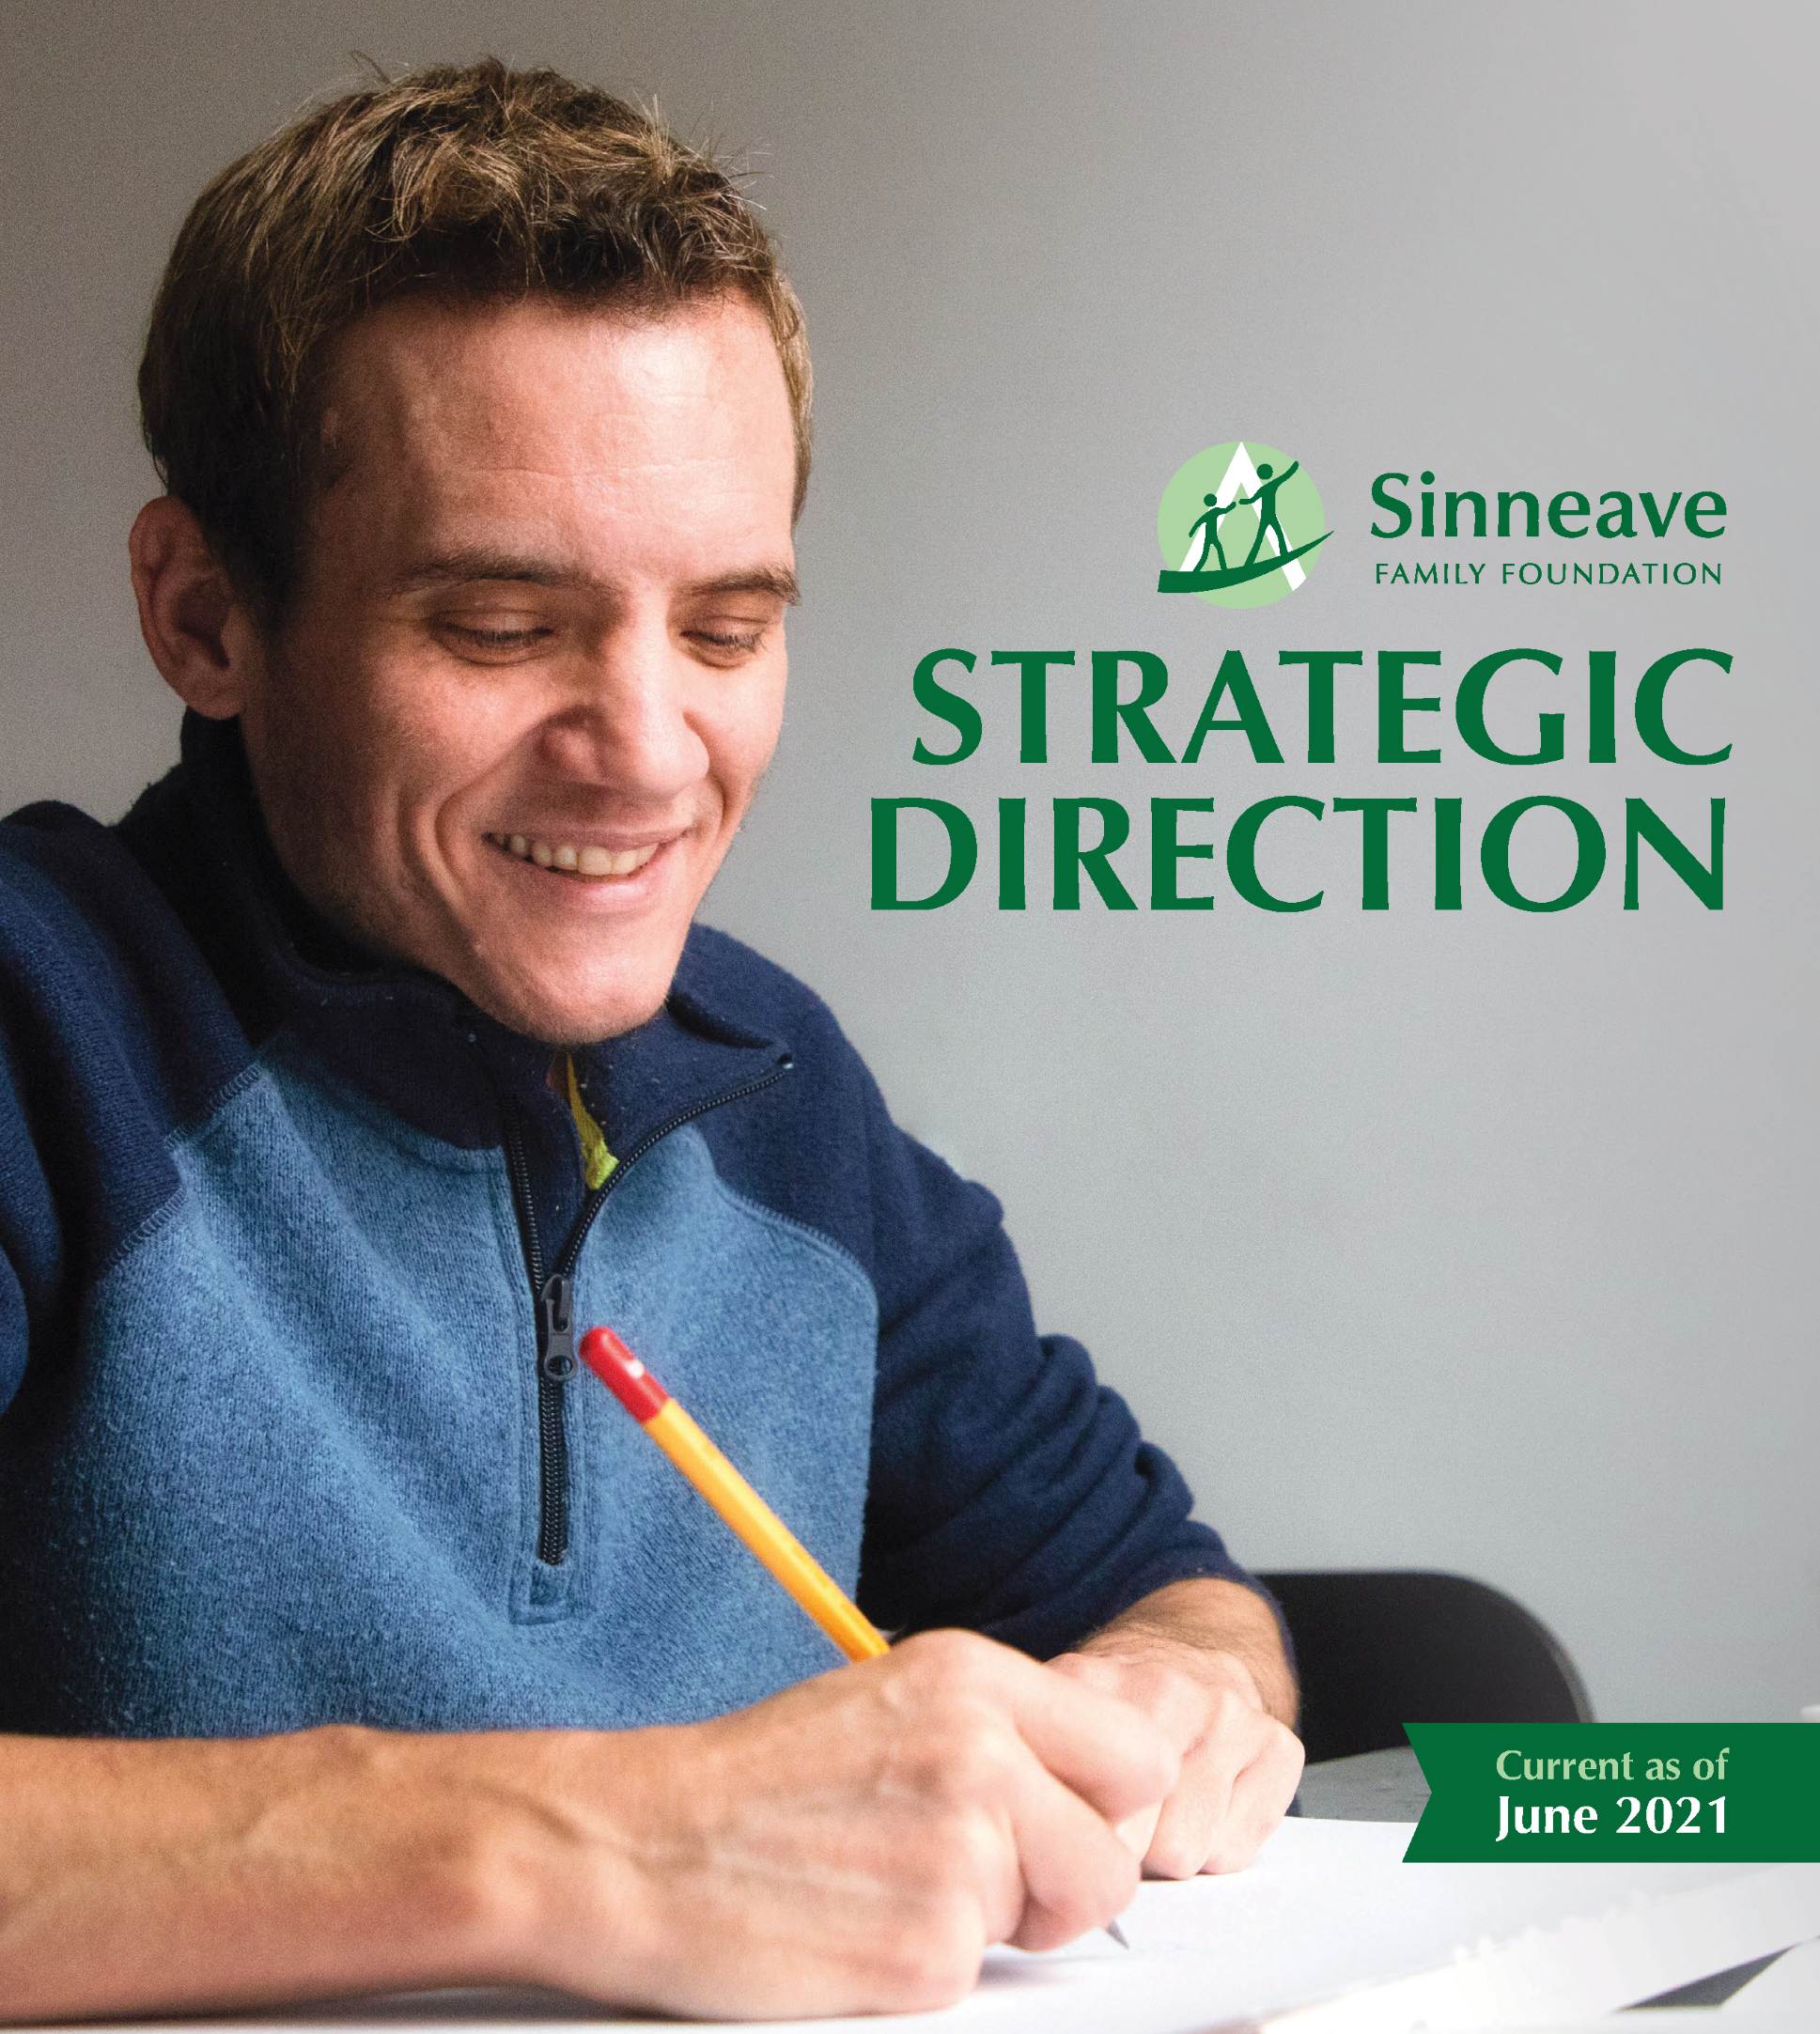 Cover Image of Sinneave's Strategic Direction Document as of June 2021